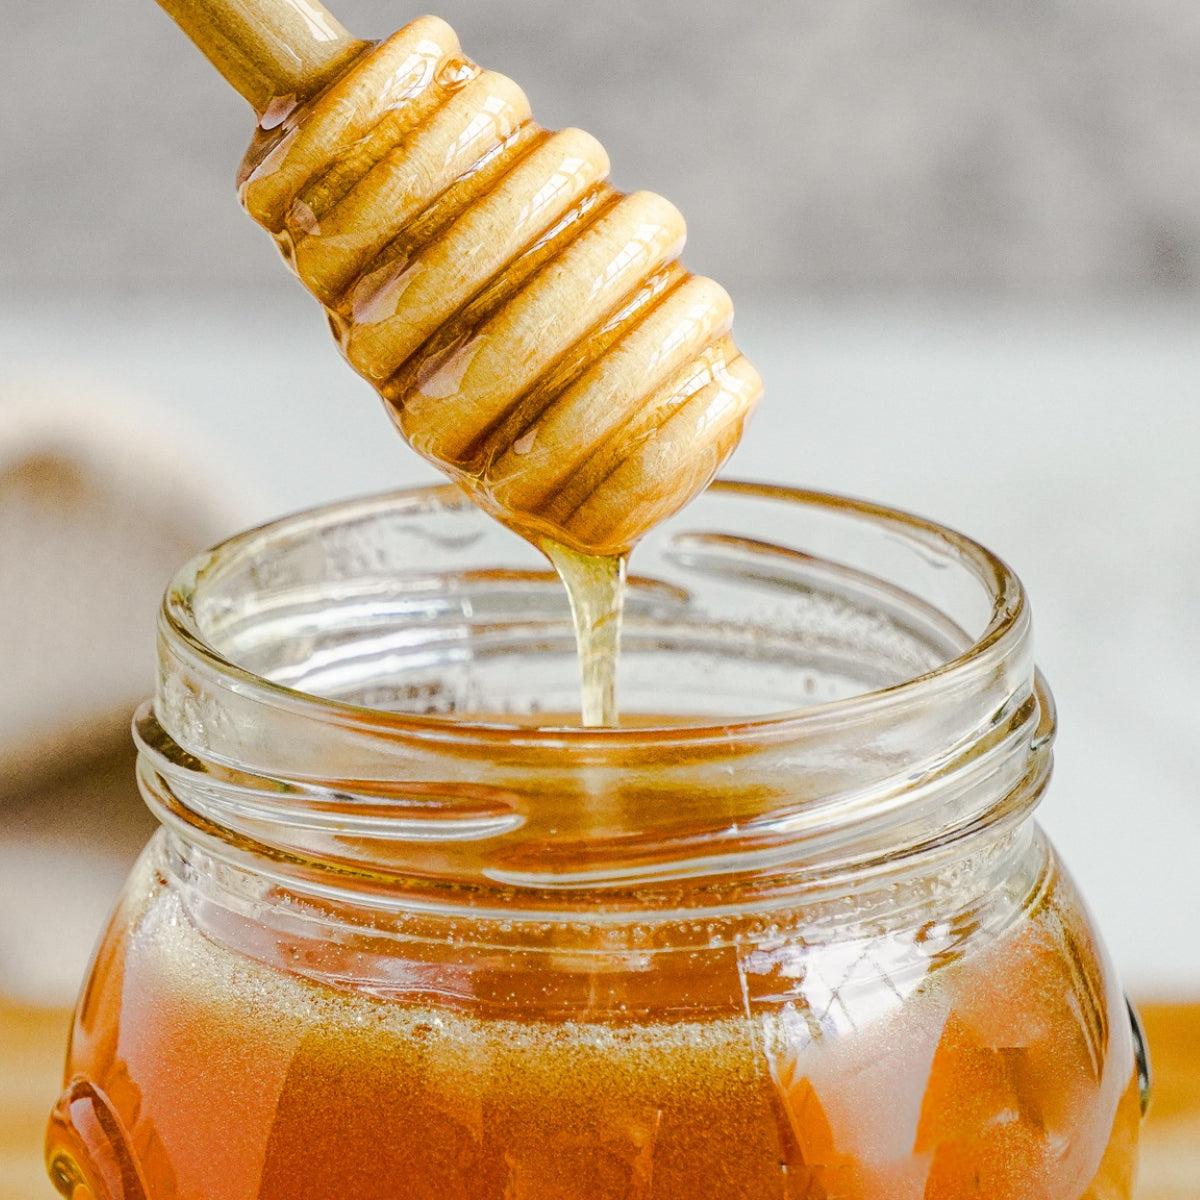 Hot honey being drizzled into a jar.